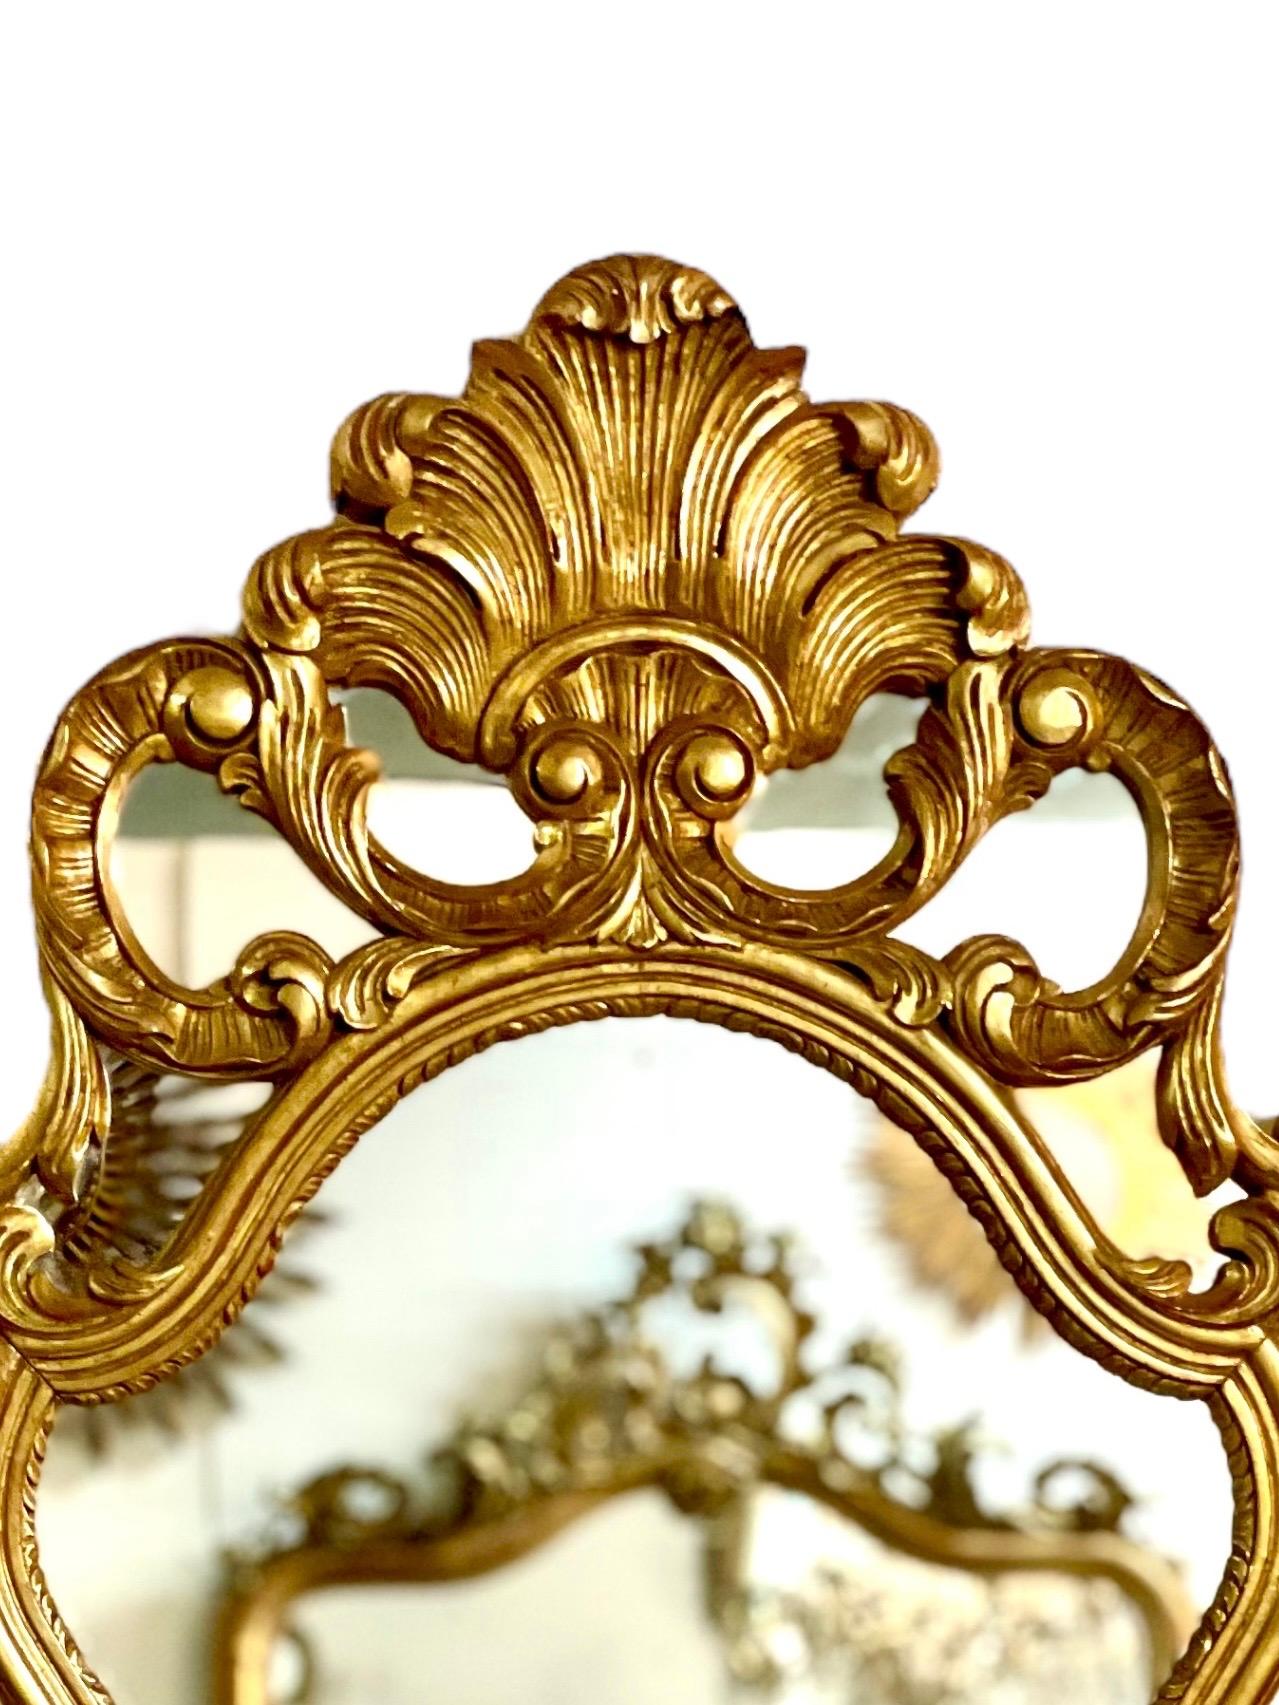 This superb Rococo-style gilt parclose wall mirror features a very ornate frame, inset with mirror plates and topped with an elaborate crest of stylised feathers. Dating from the 20th century, this large and impressive mirror has been beautifully